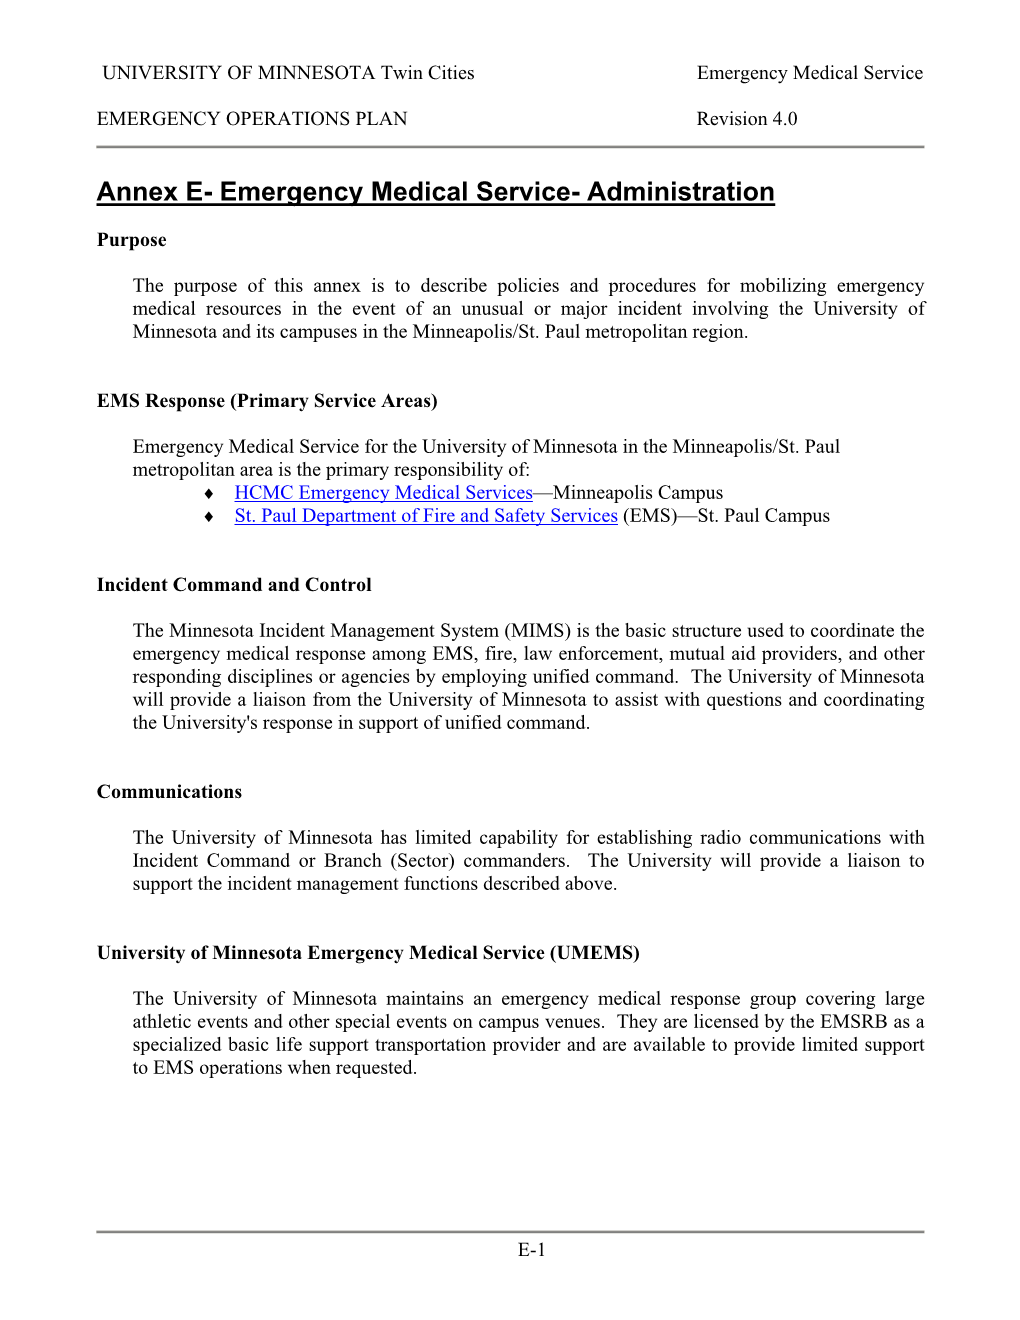 Annex E- Emergency Medical Service- Administration